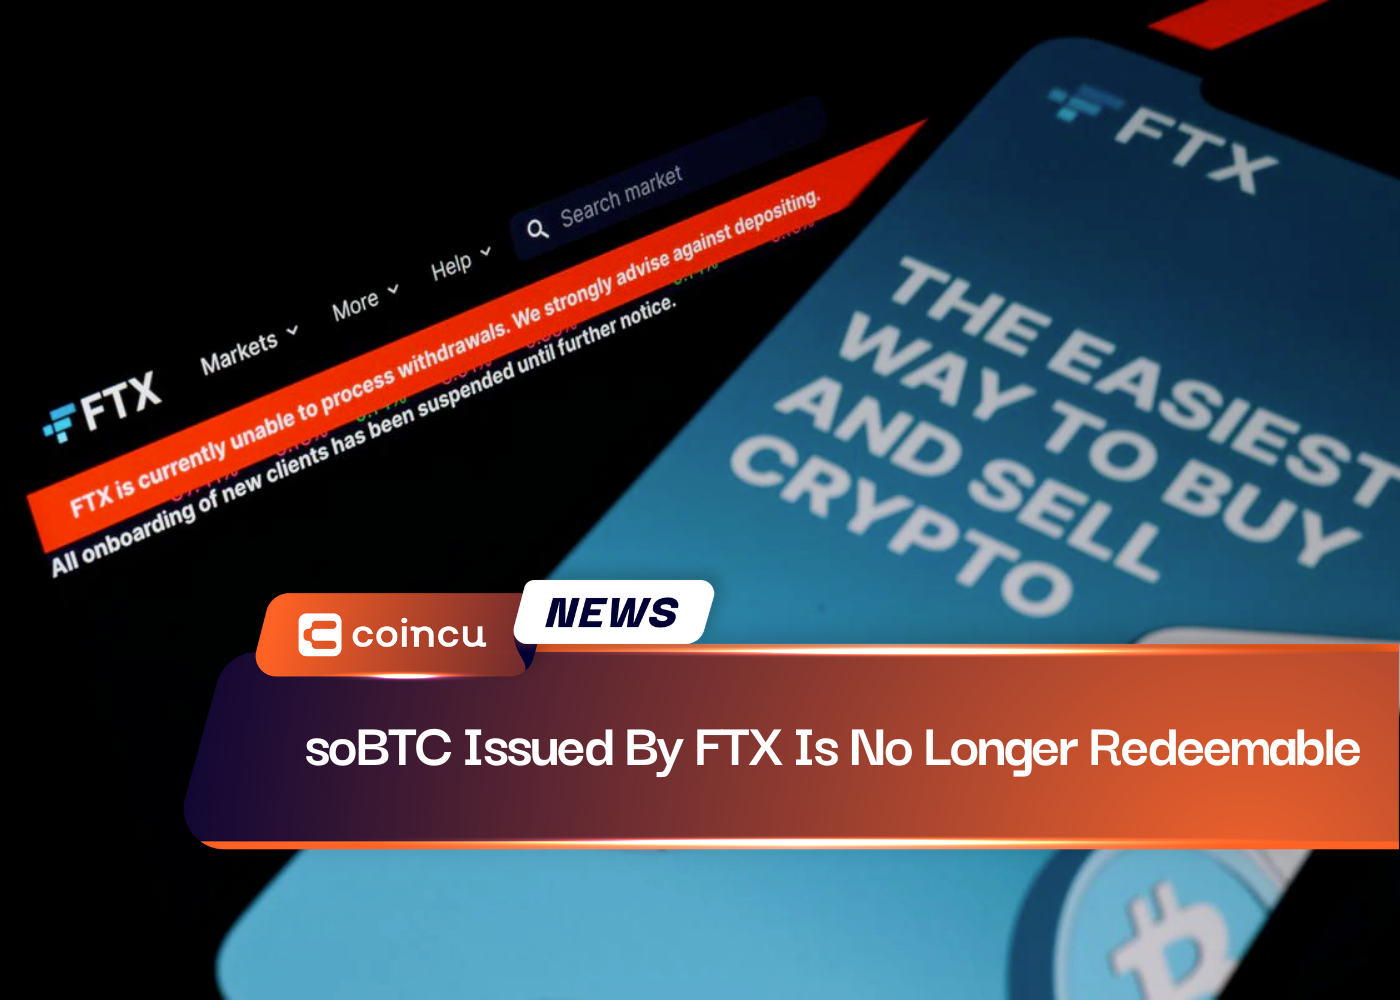 soBTC Issued By FTX Is No Longer Redeemable